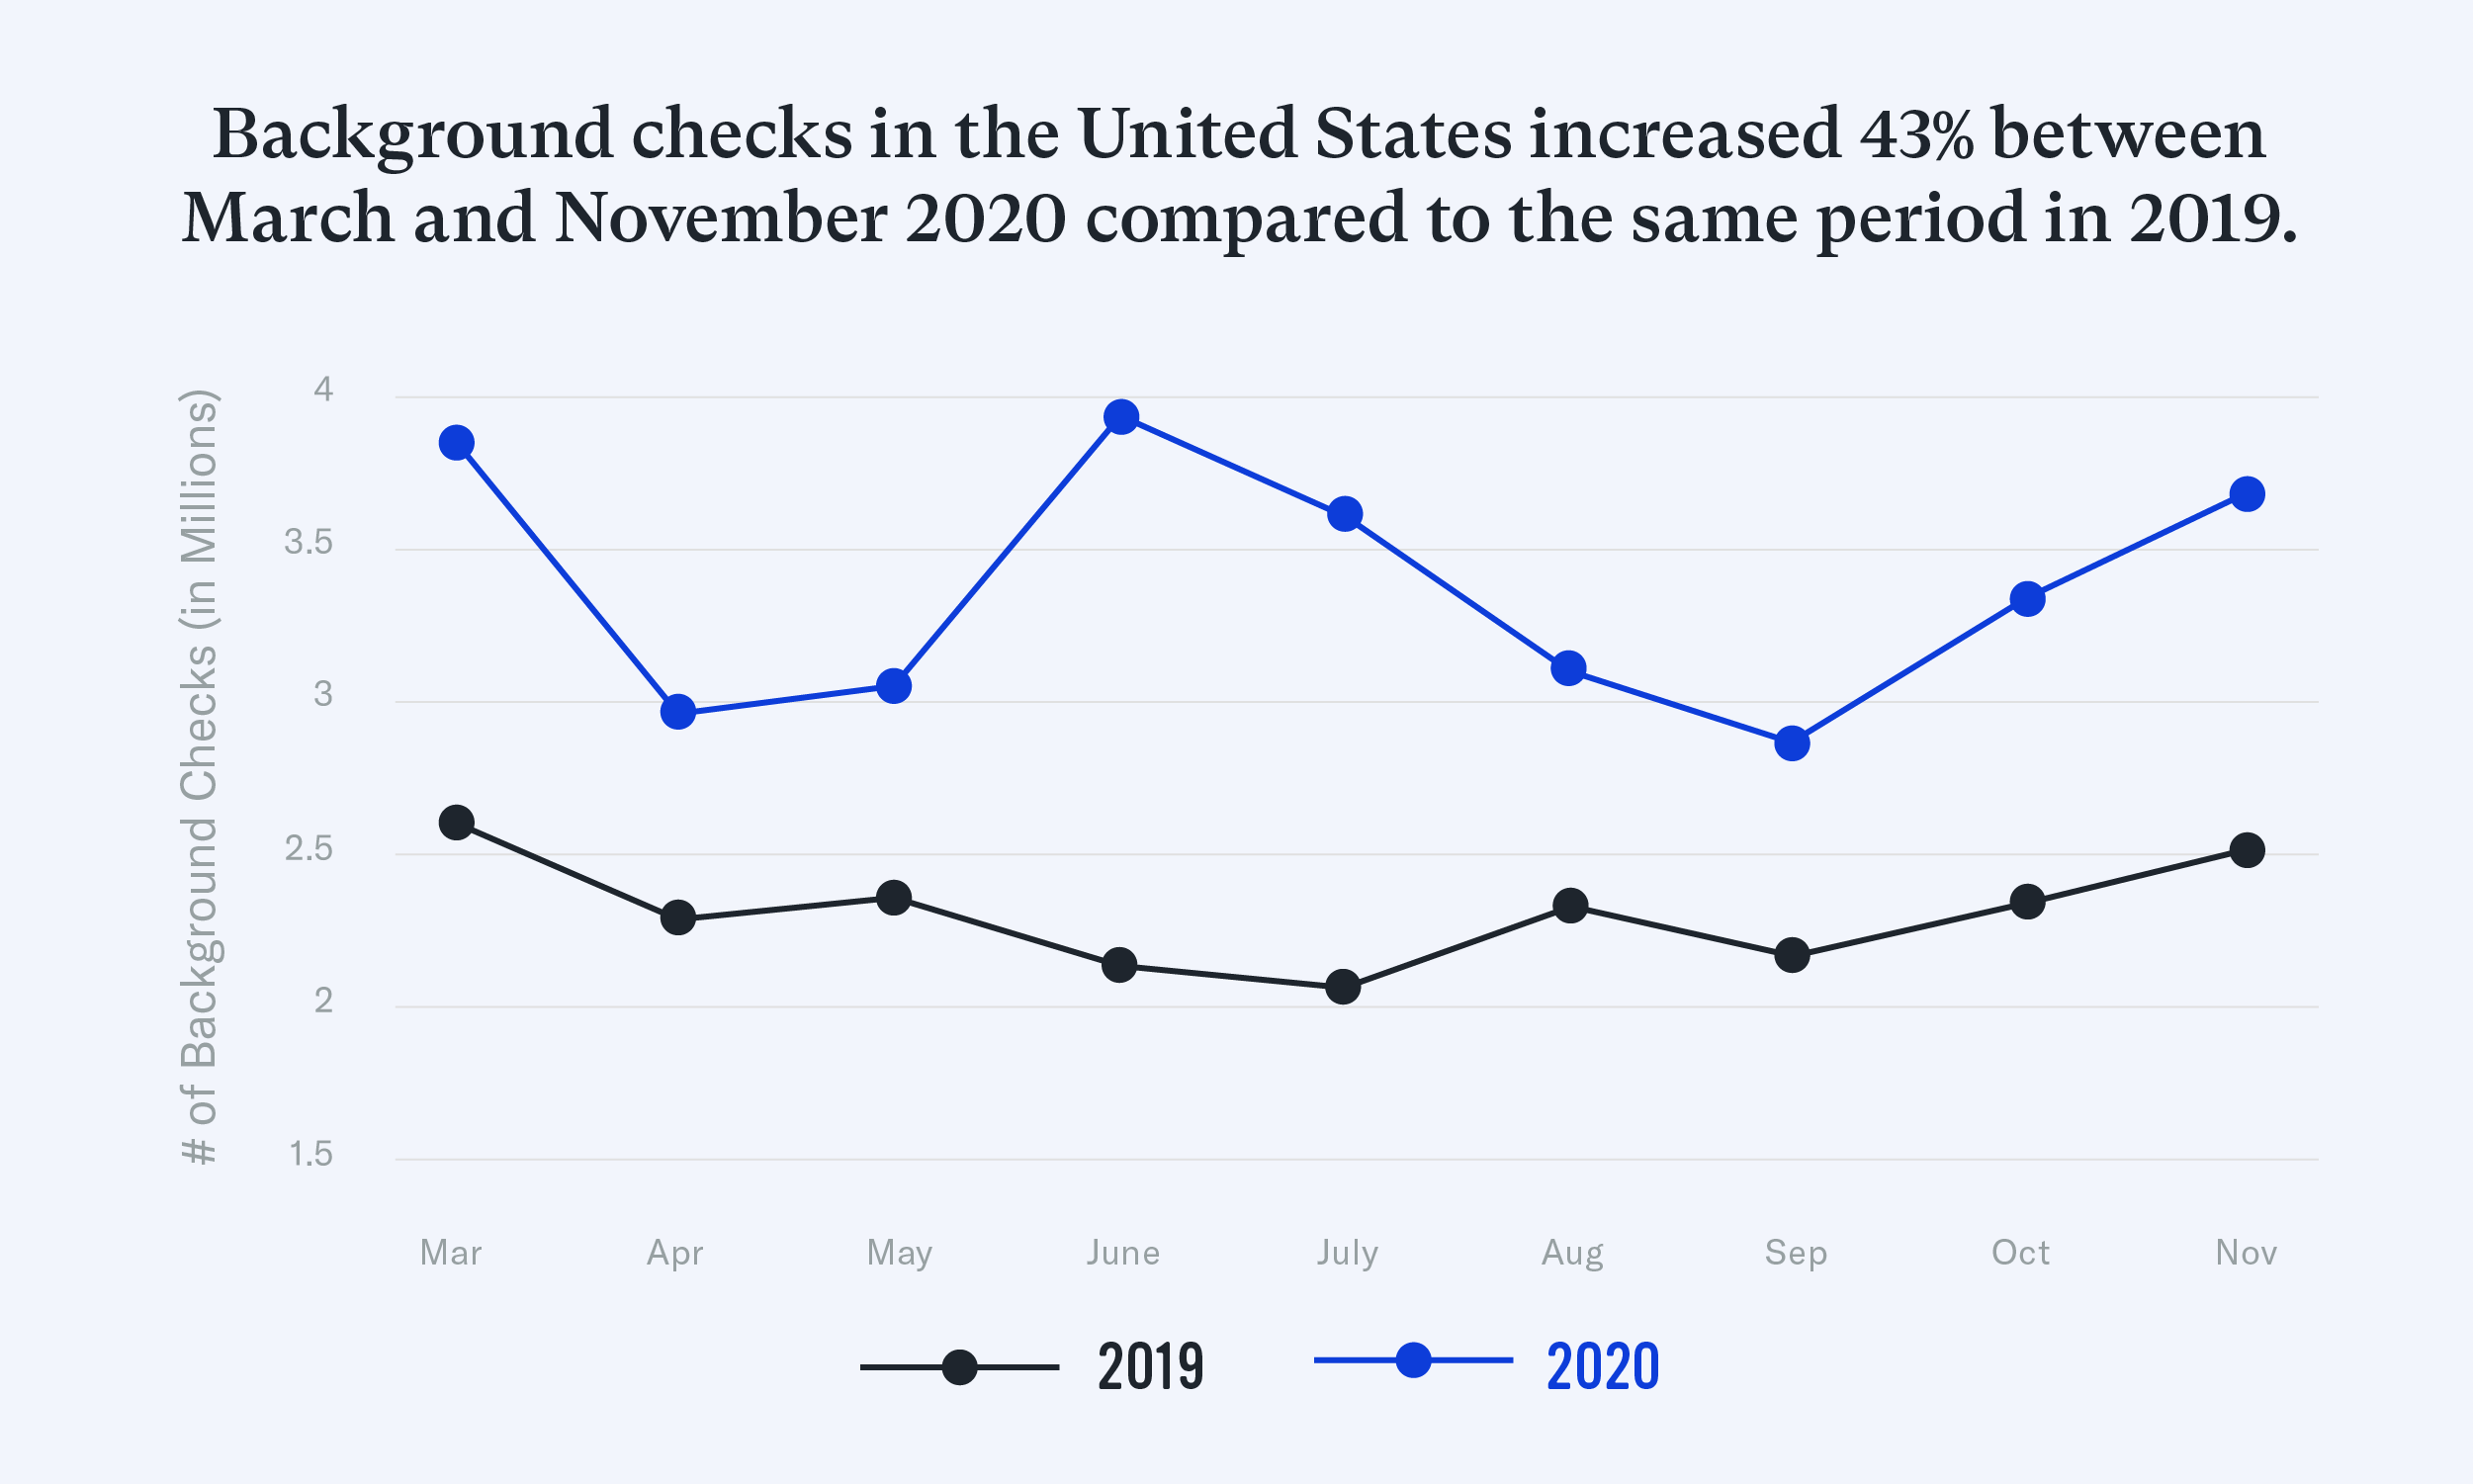 Background checks in the United States increased 43% between March and November 2020 compared to the same time period in 2019.